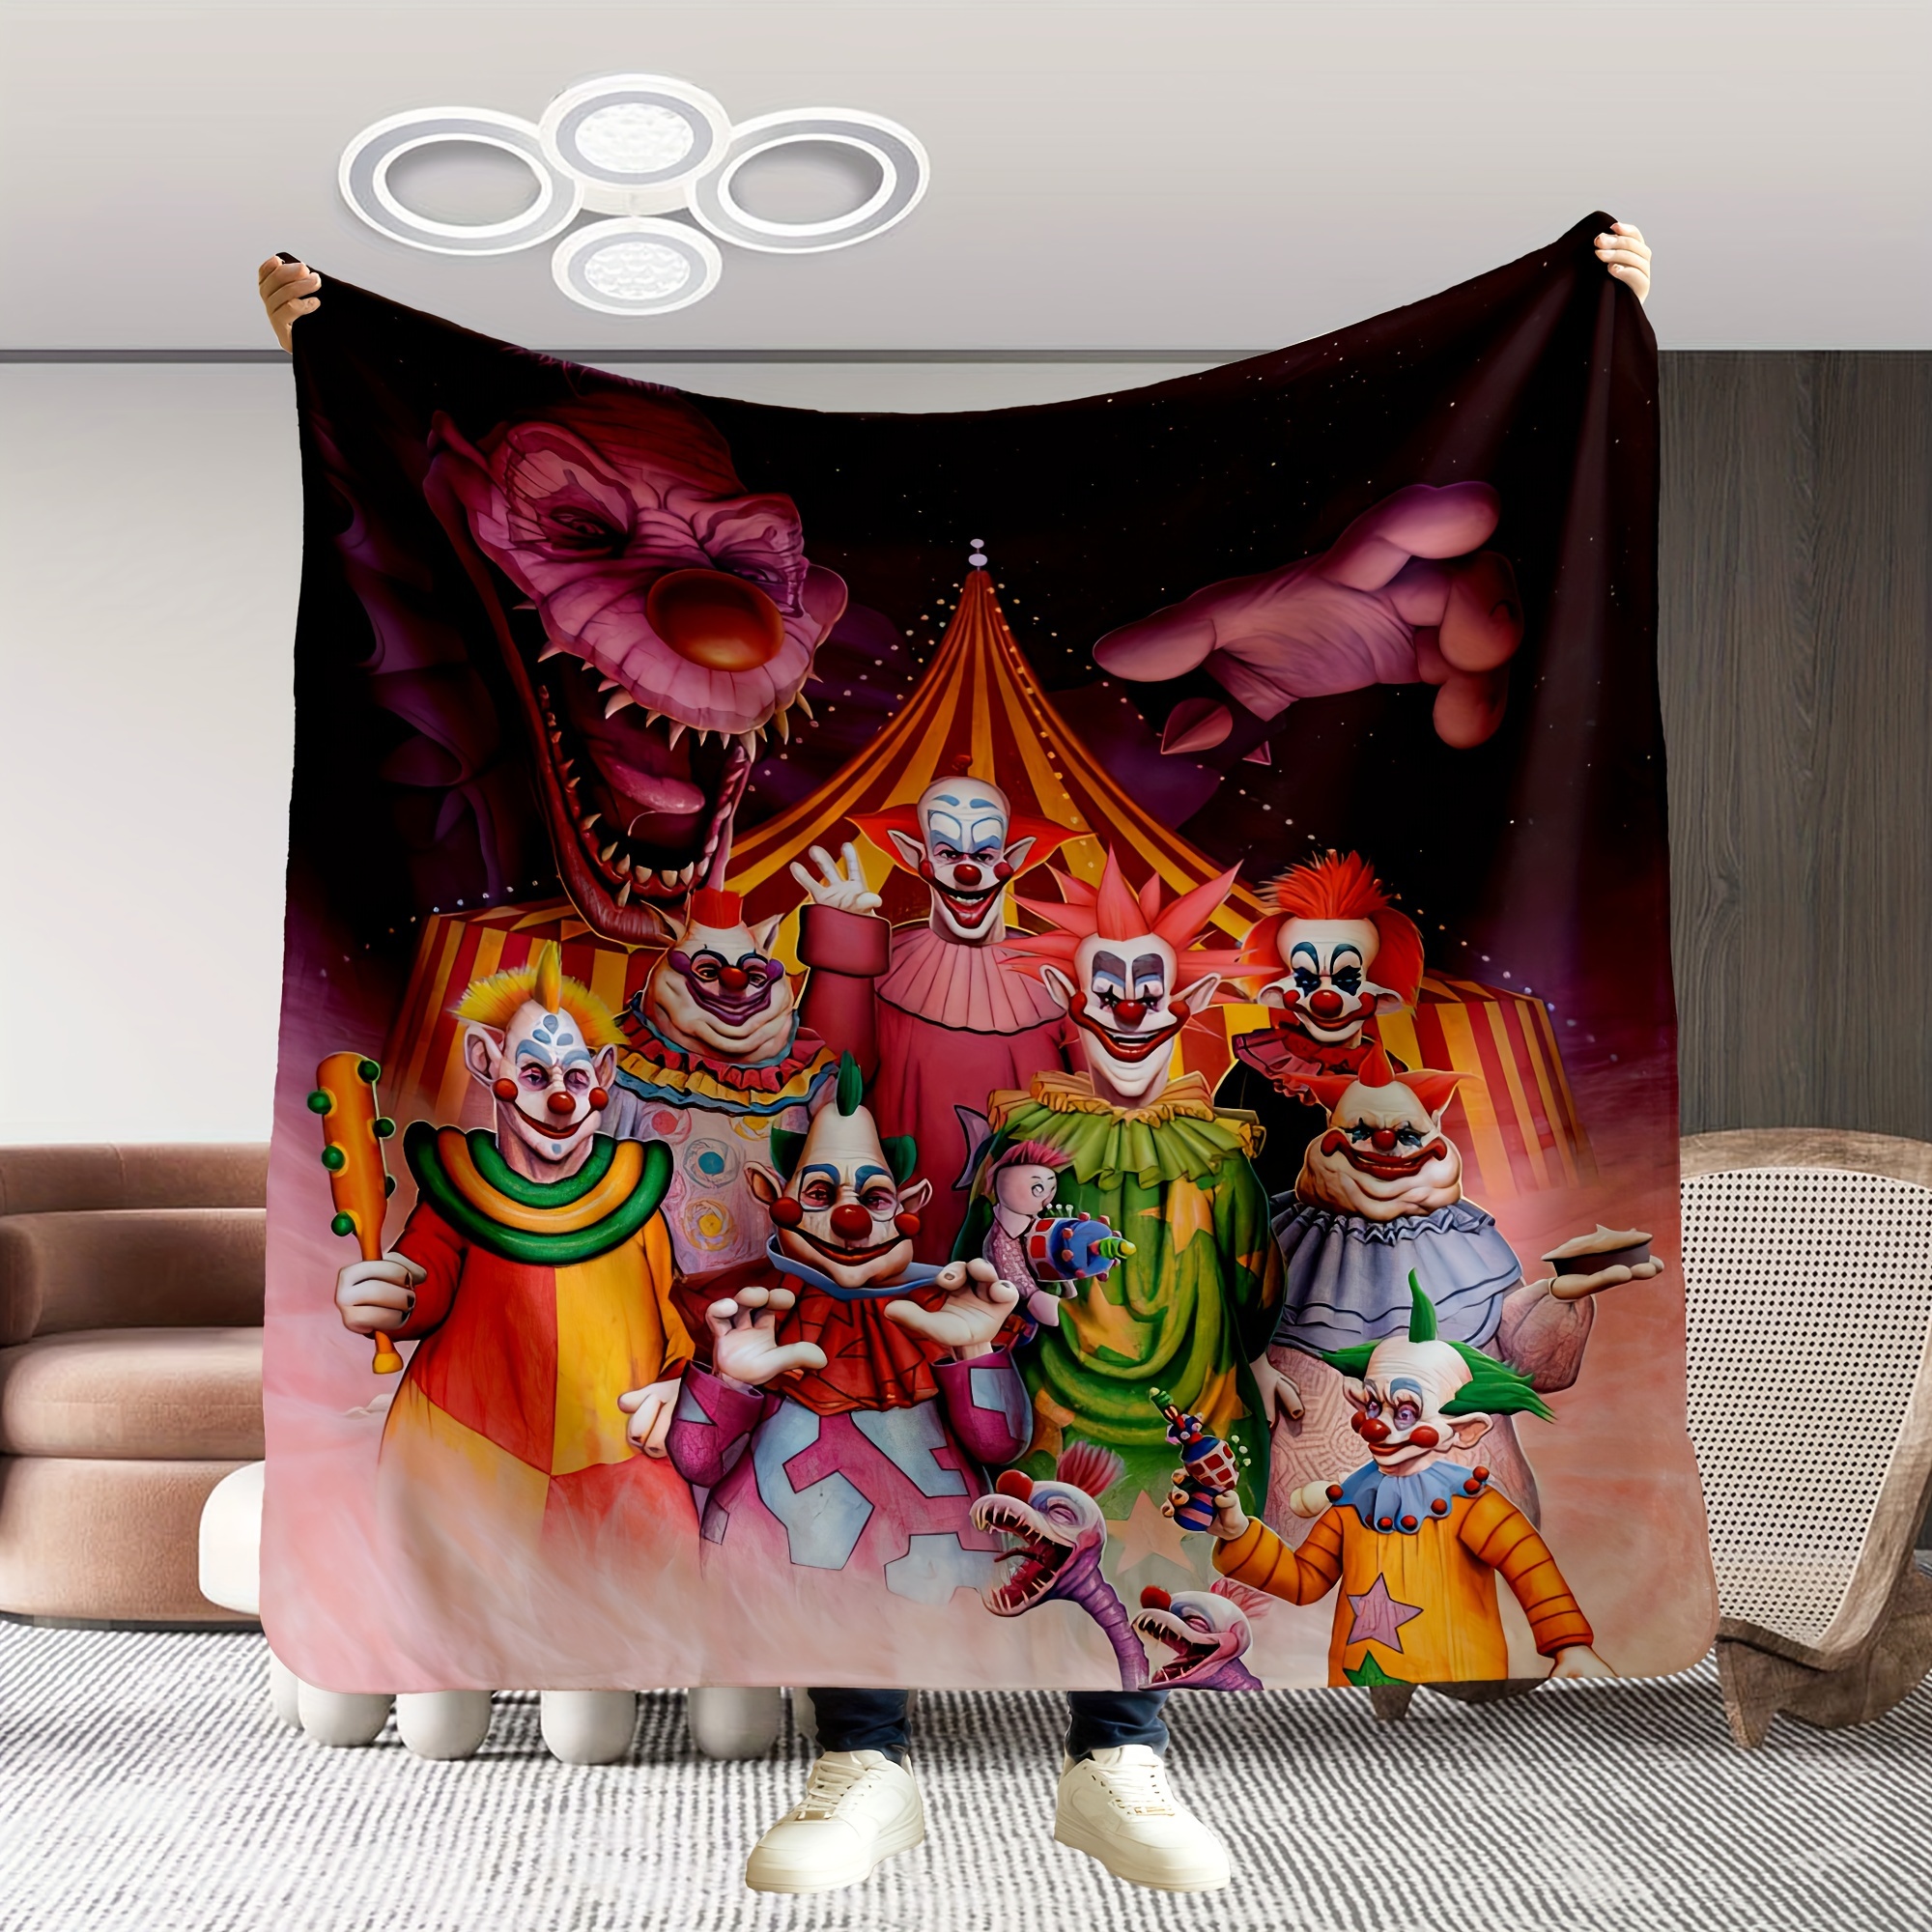 

Halloween Horror Circus Clown Flannel Throw Blanket - Soft, Warm & Reversible For Couch, Office, Bed, Camping | All-season Gift